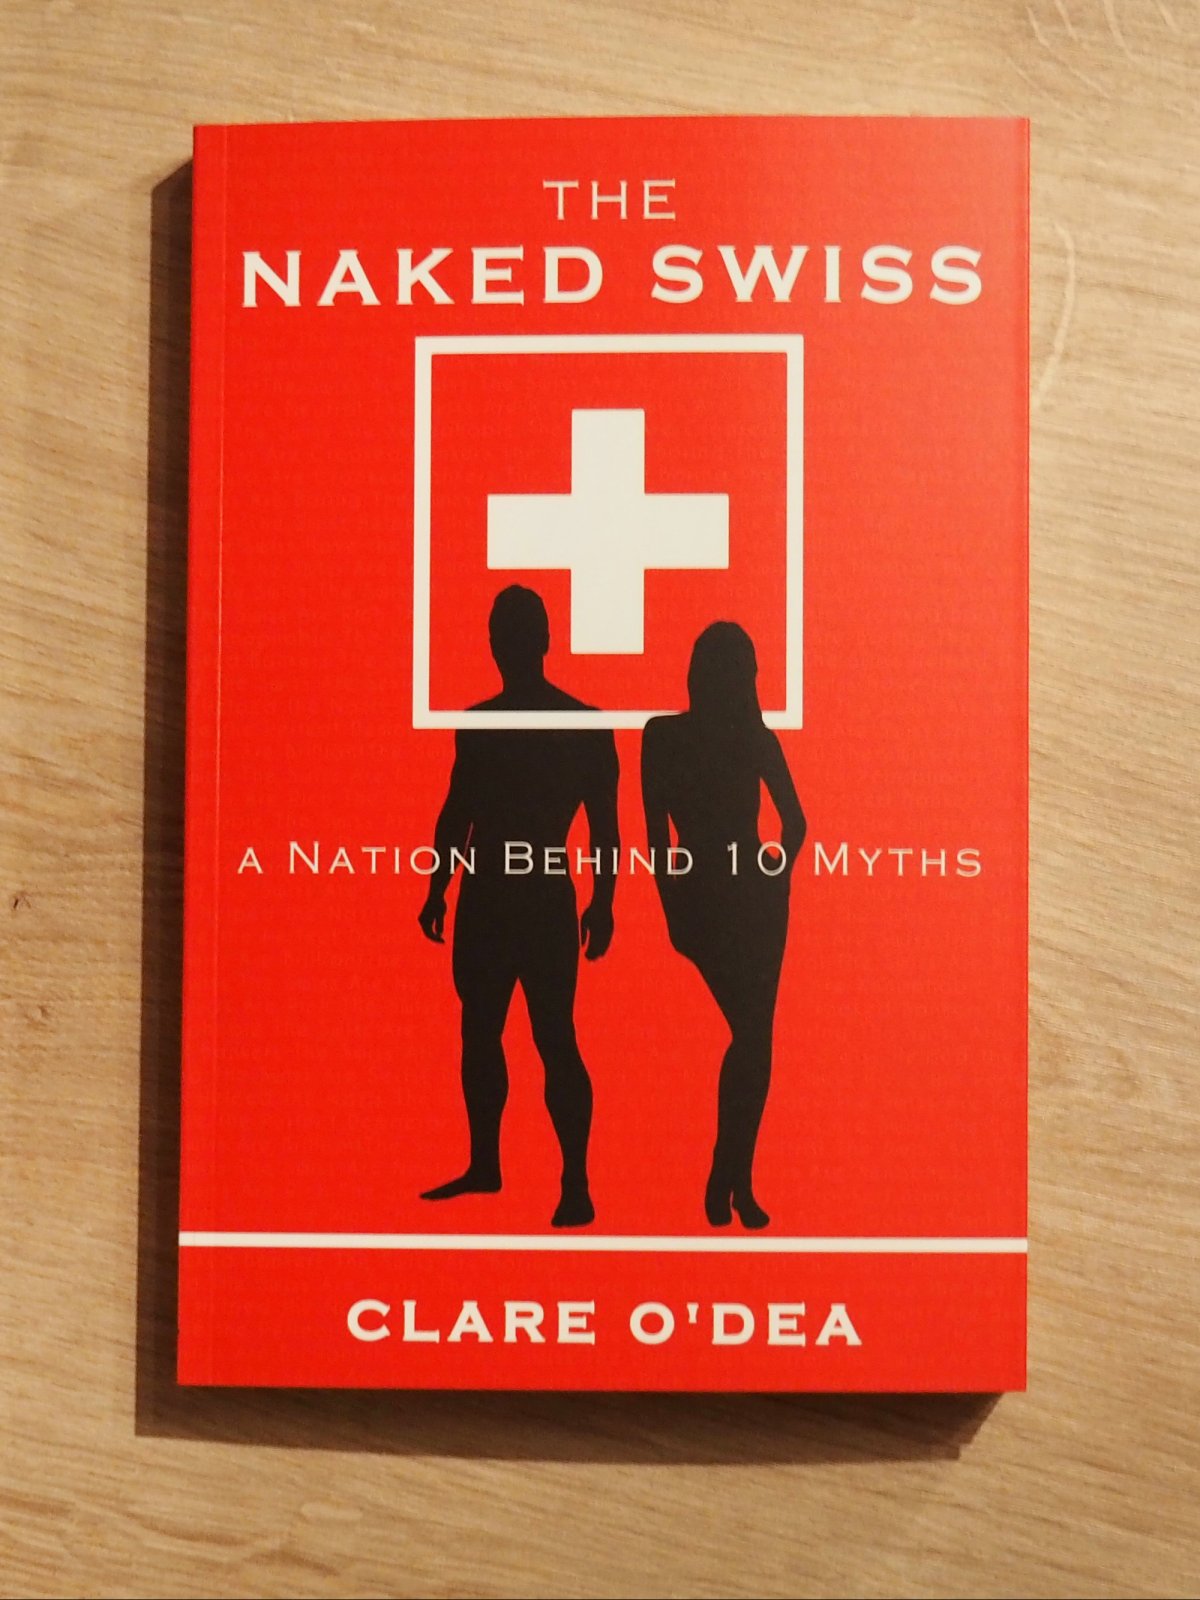 The Naked Swiss Book by Clare O'Dea